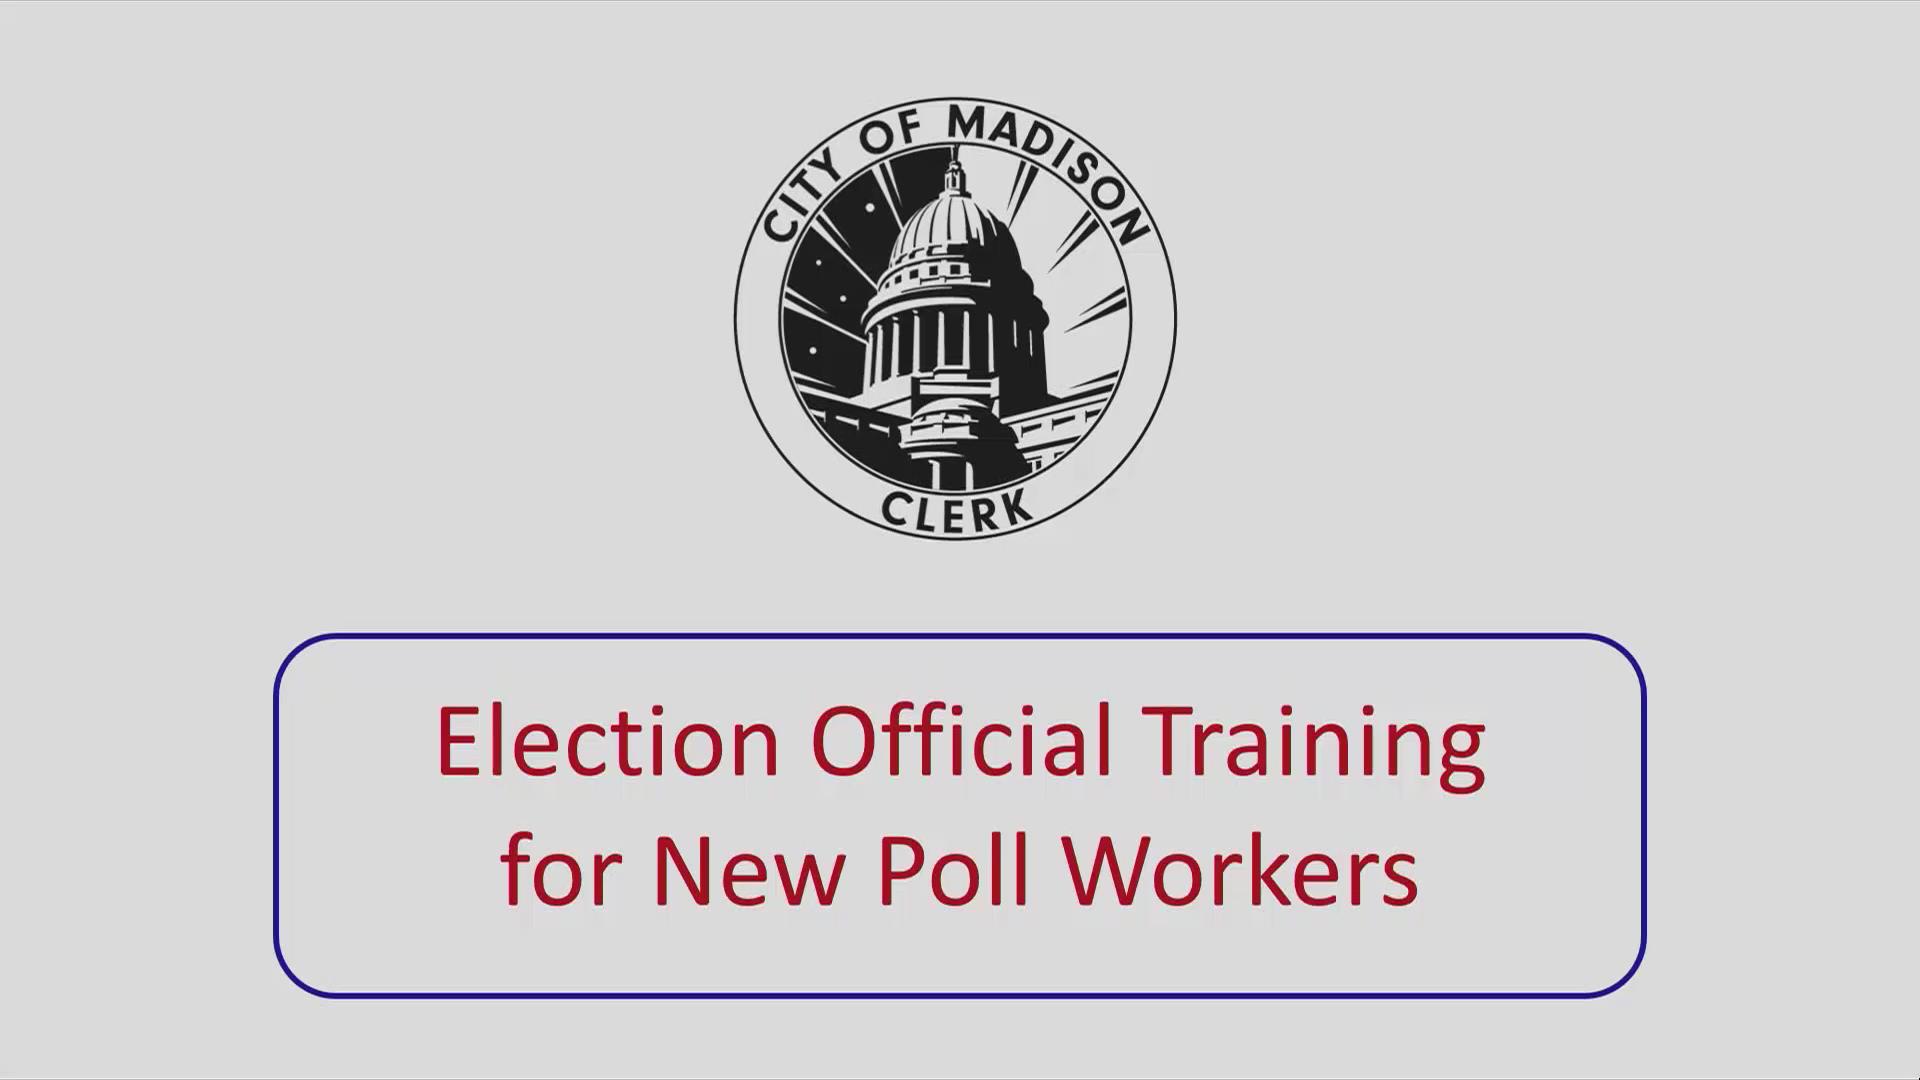 Election Official Training for New Poll Workers